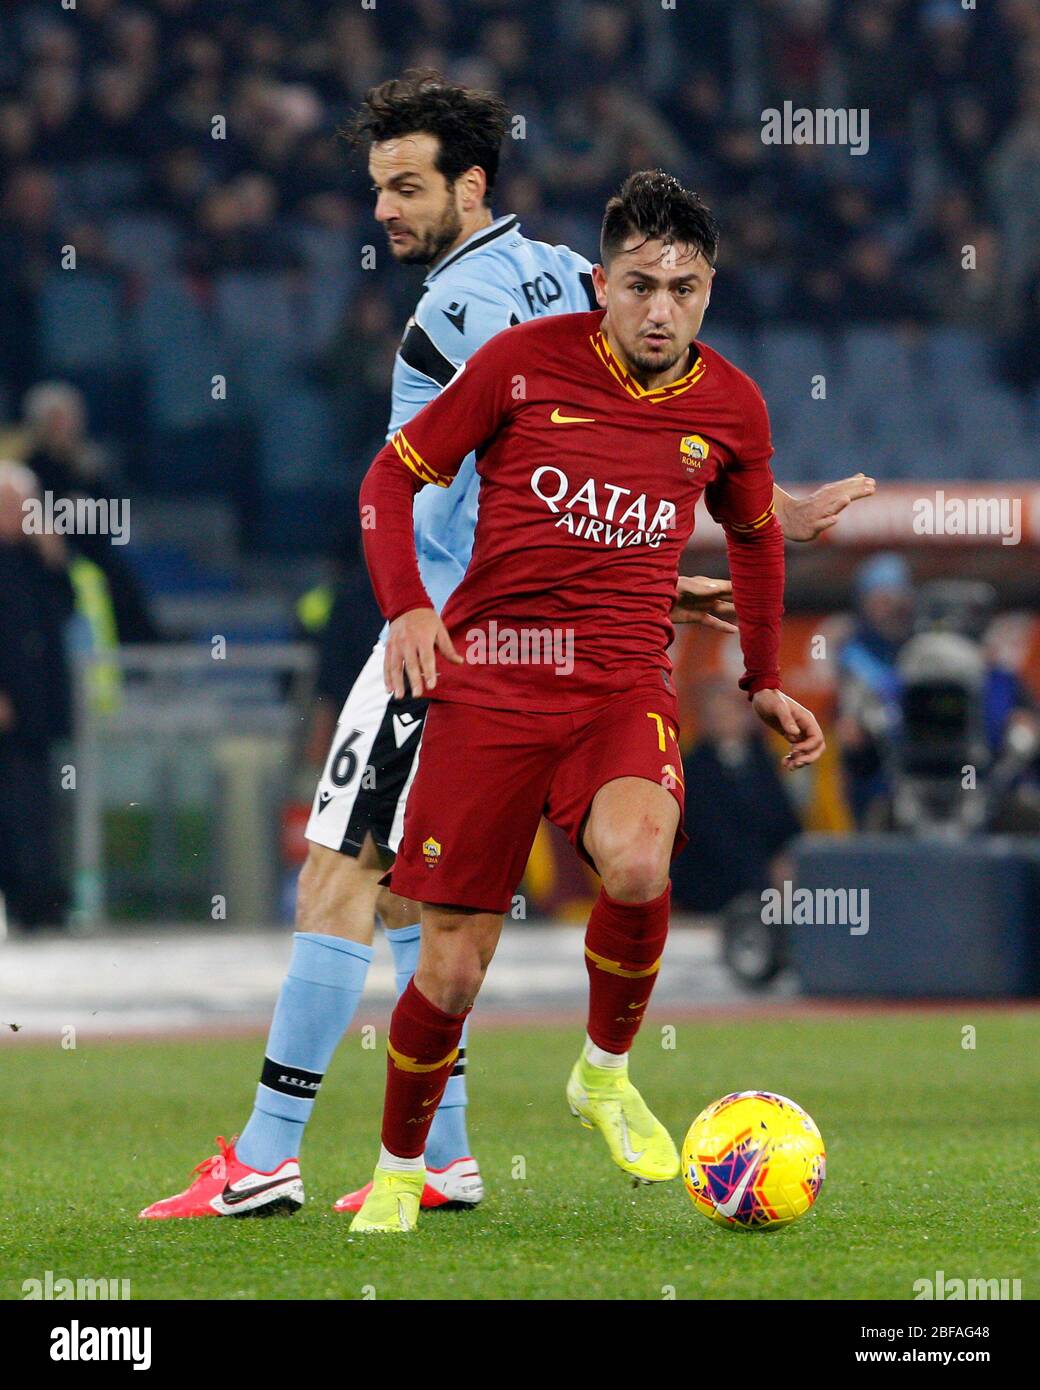 Rome, Italy, January 26, 2020. Roma s Cengiz Under, right, in action past Lazio s Marco Parolo during the Serie A soccer match between Roma and Lazio at the Olympic Stadium. Stock Photo